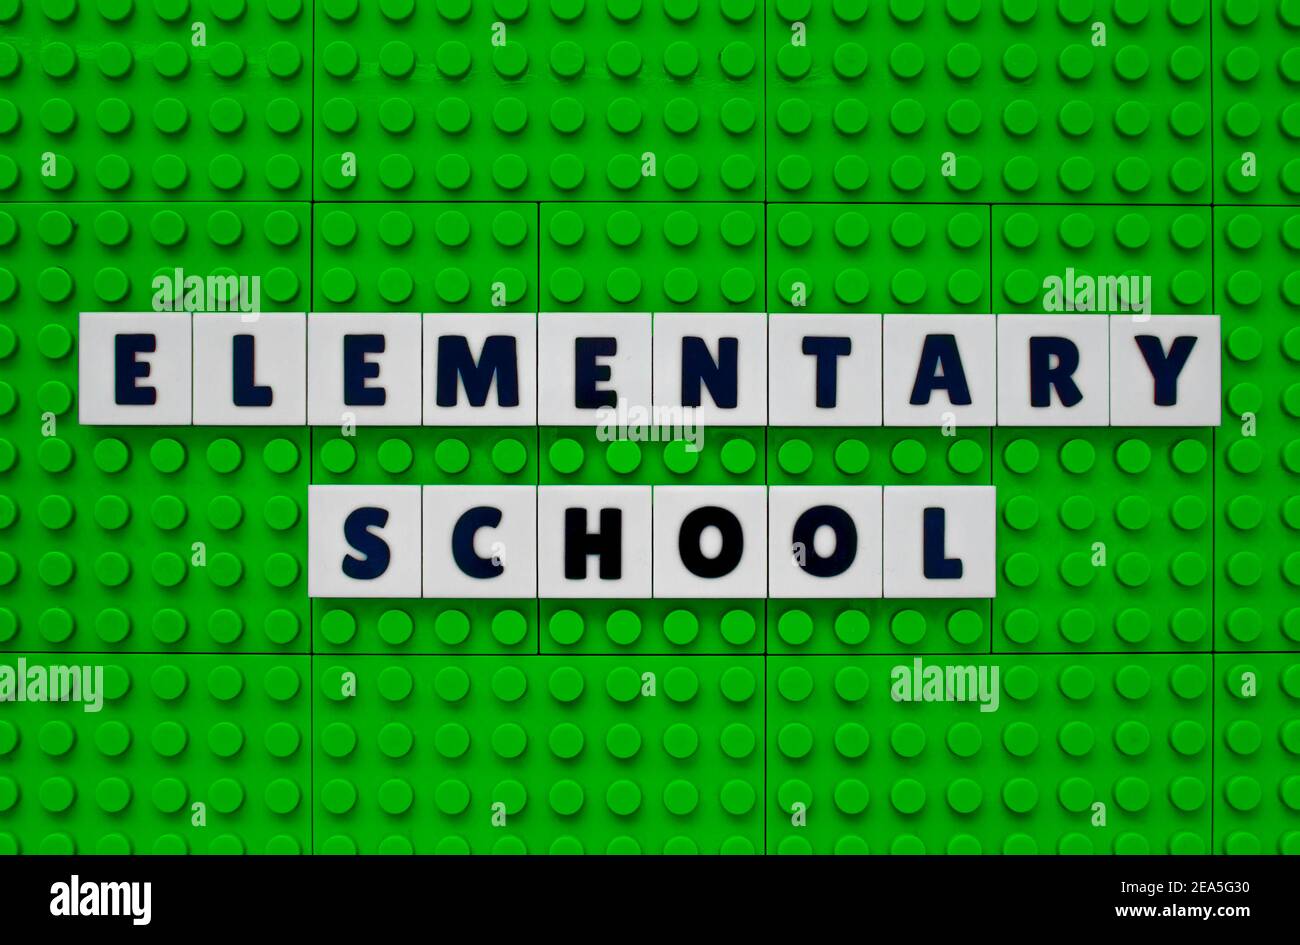 Elementary School sign text build with interlocking plastic white and sky green bricks Stock Photo